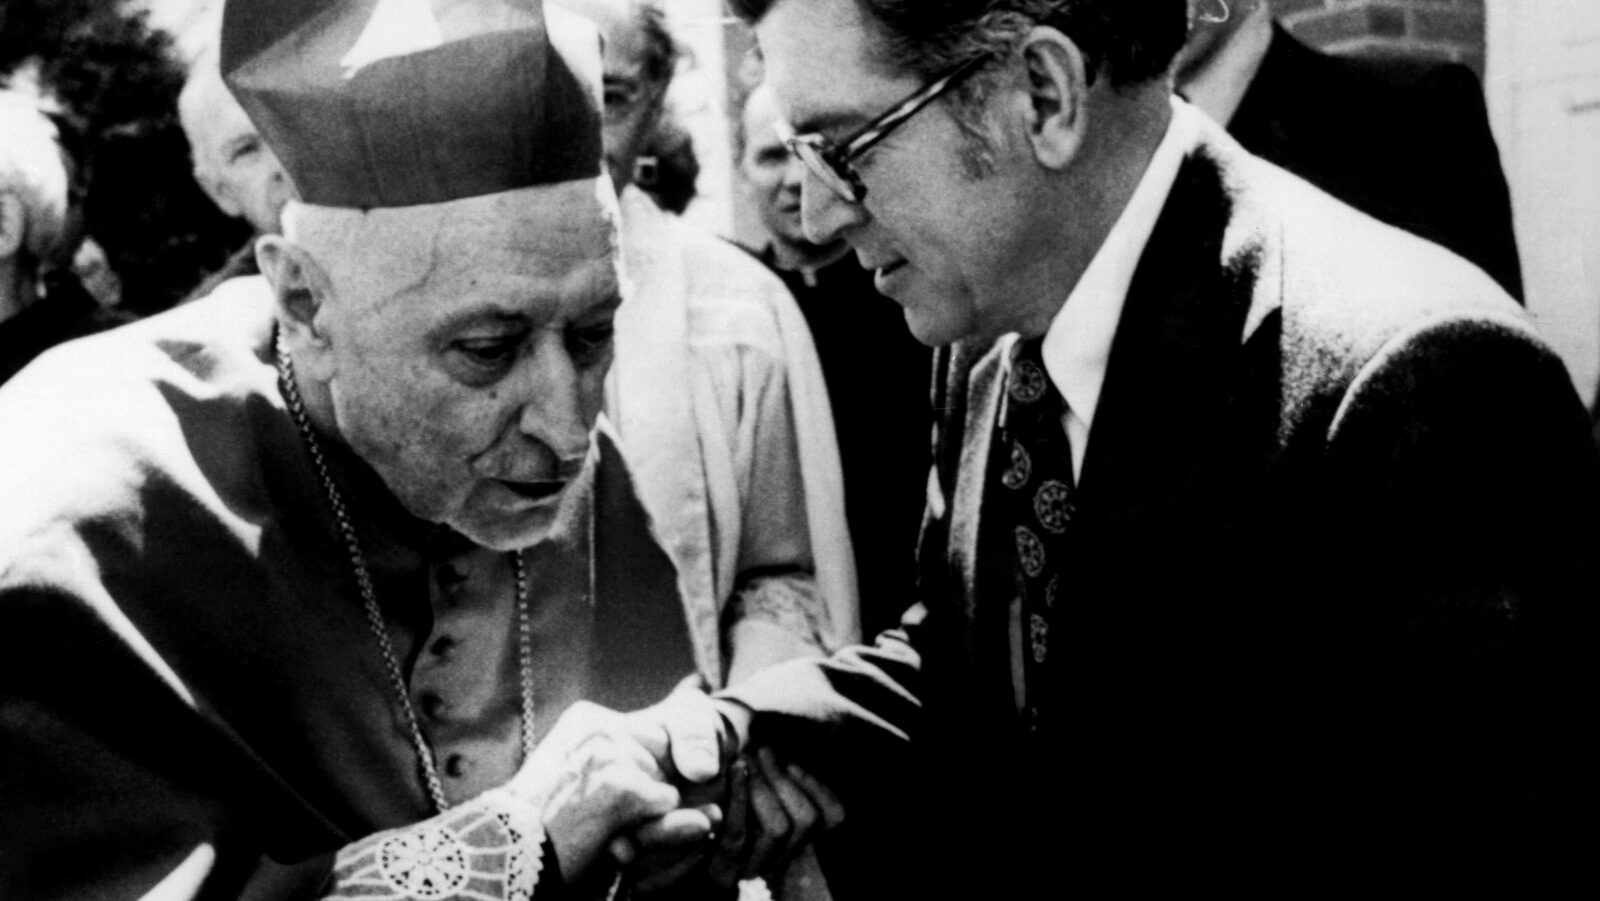 Gov. Thomas J. Meskill has a few private words with Cardinal Jozsef Mindszenty, former primate of Hungary as the Cardinal arrived at St Ladislaus' Church in Norwalk, Conn. on Wednesday, May 8, 1974. Meskill was on hand to greet the Cardinal. Photo | AP